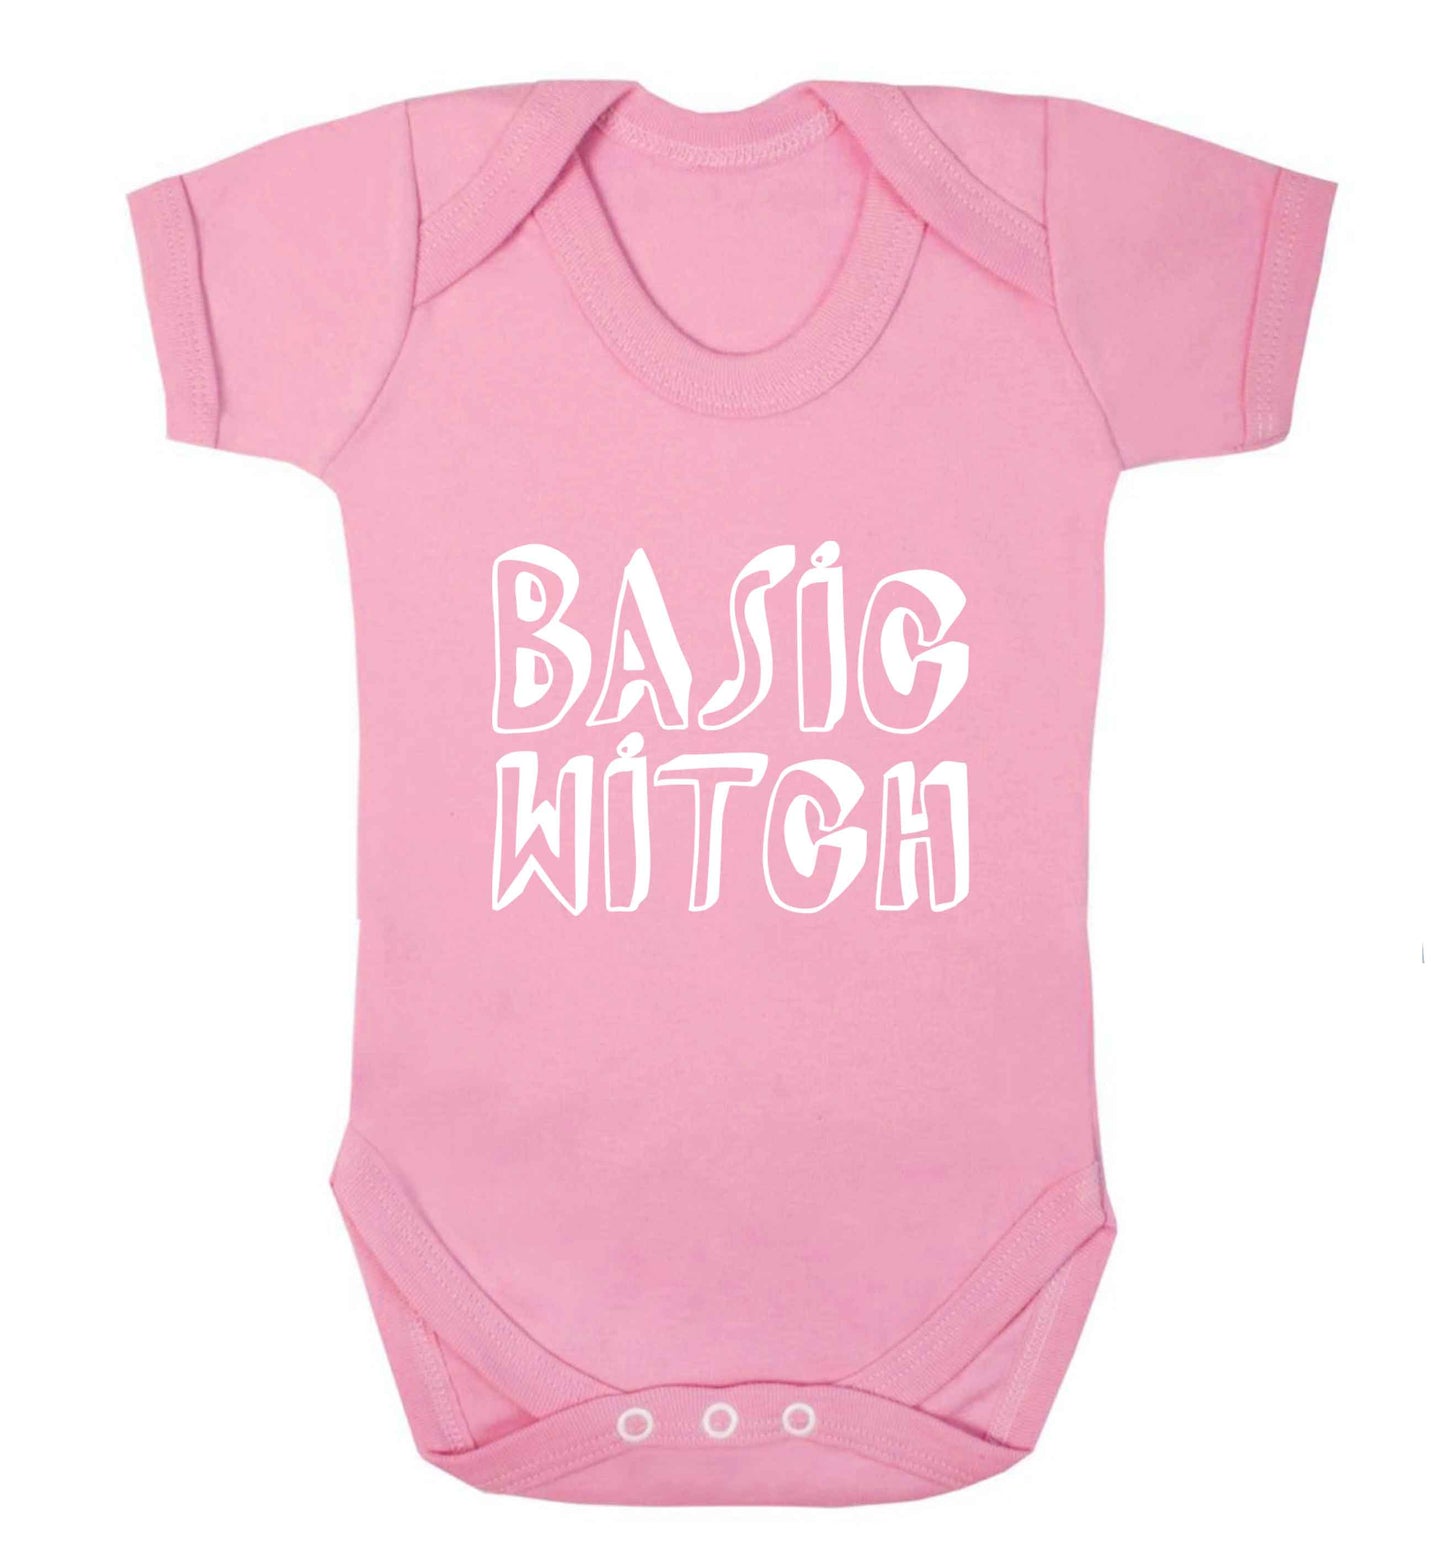 Basic witch baby vest pale pink 18-24 months